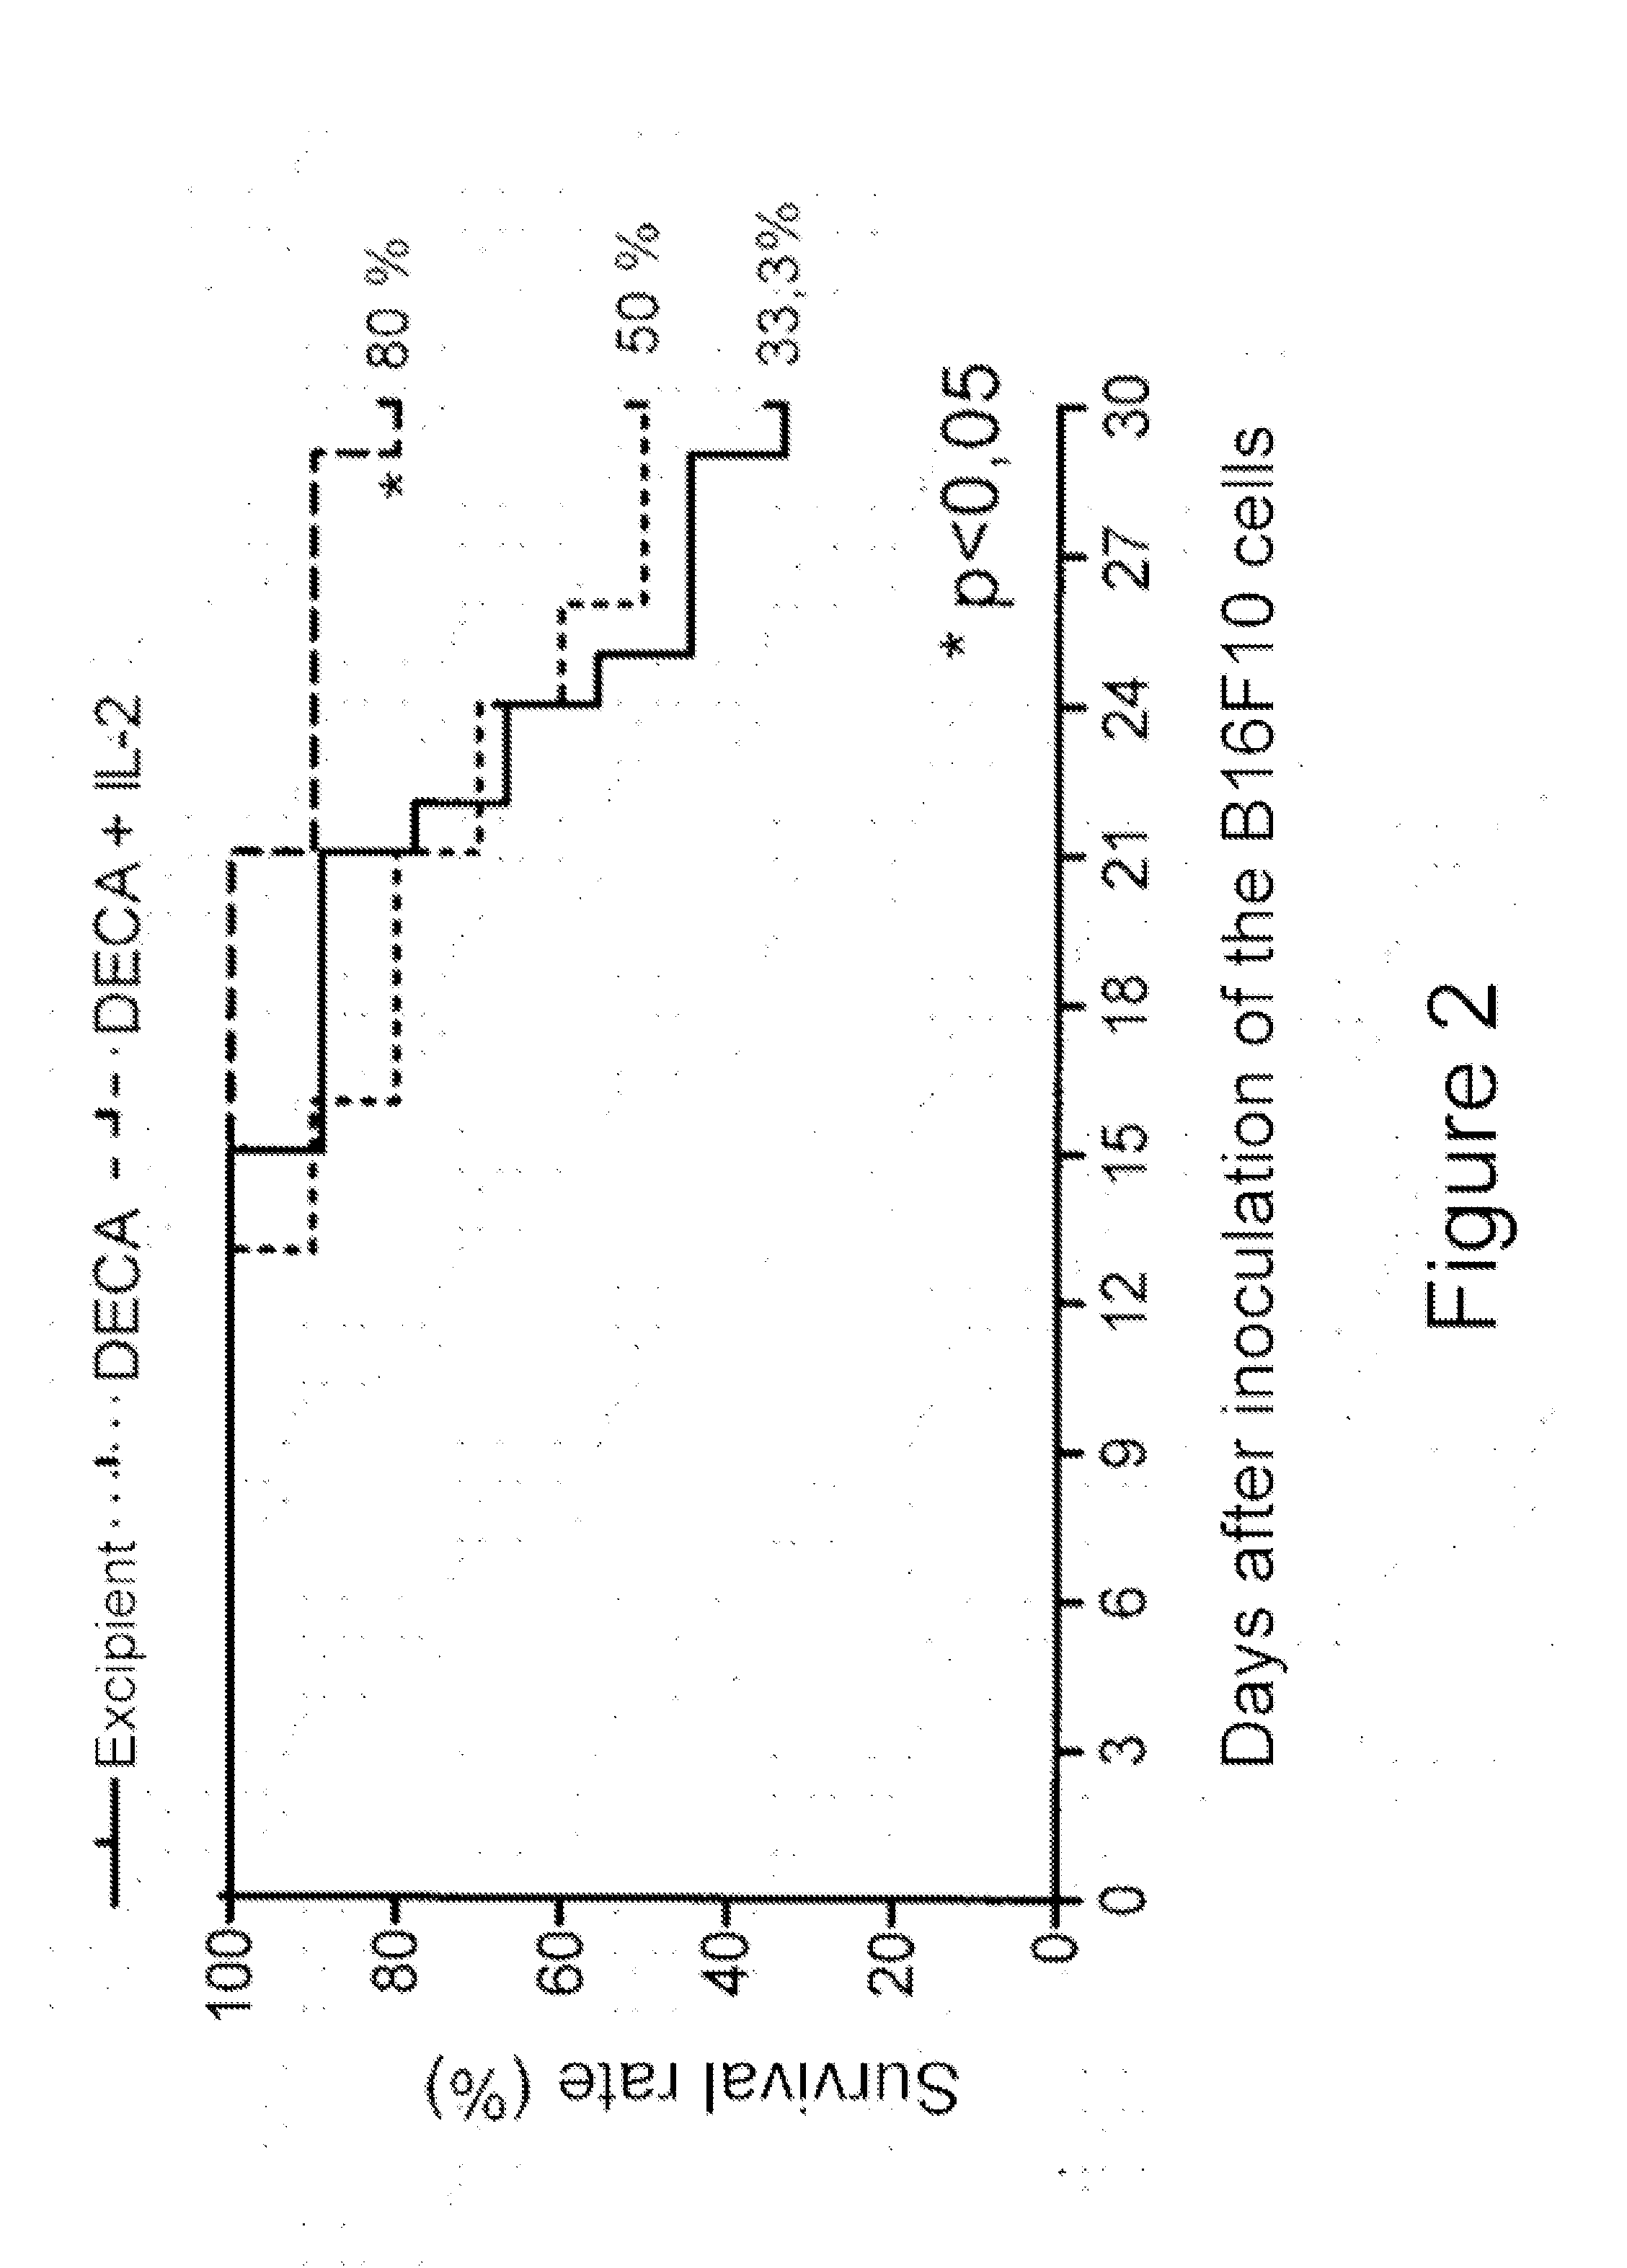 Immunogenic composition for immune system modulation and use thereof, method for treating and preventing diseases, method for inducing cell regeneration and method for restoring immune response